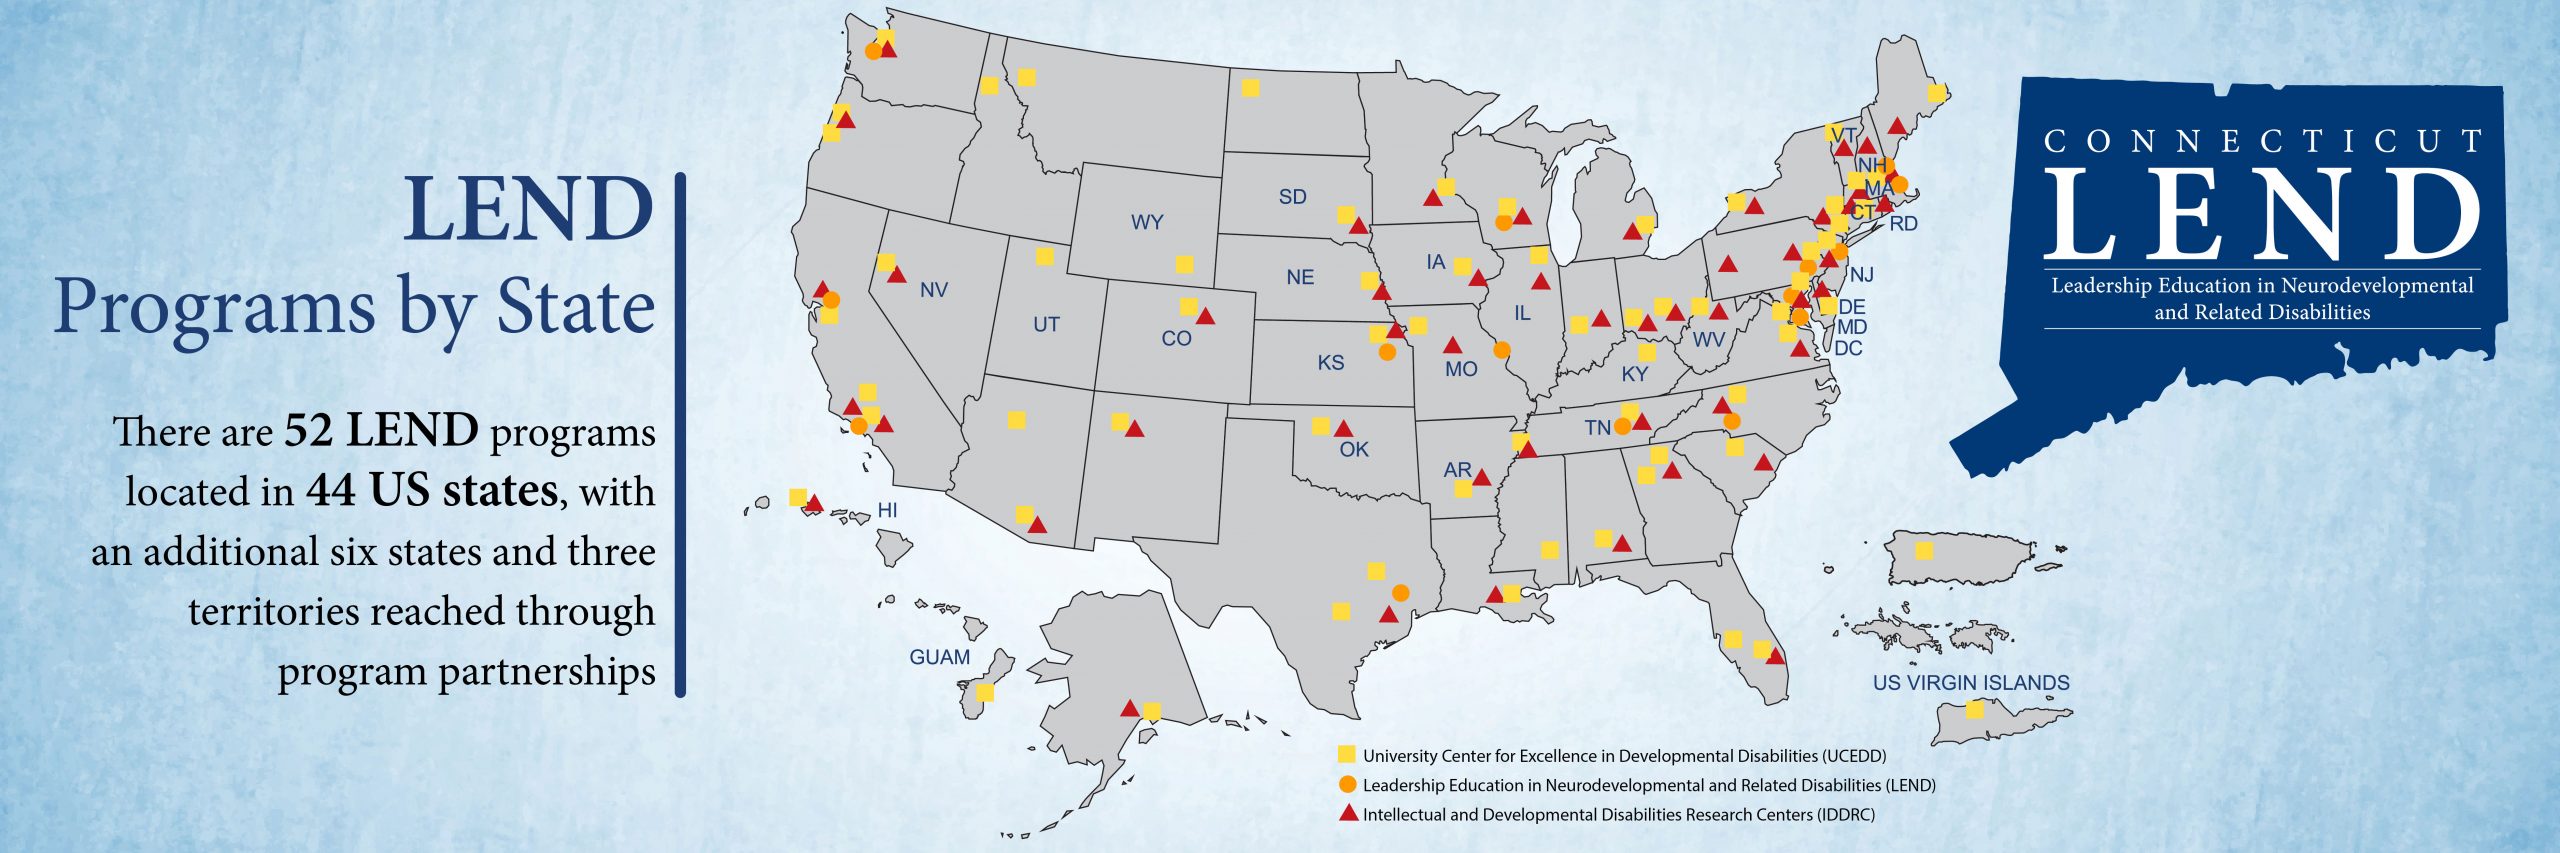 Info graphic showing where the UCEDD, CT LEND and IDDRC programs are located by State